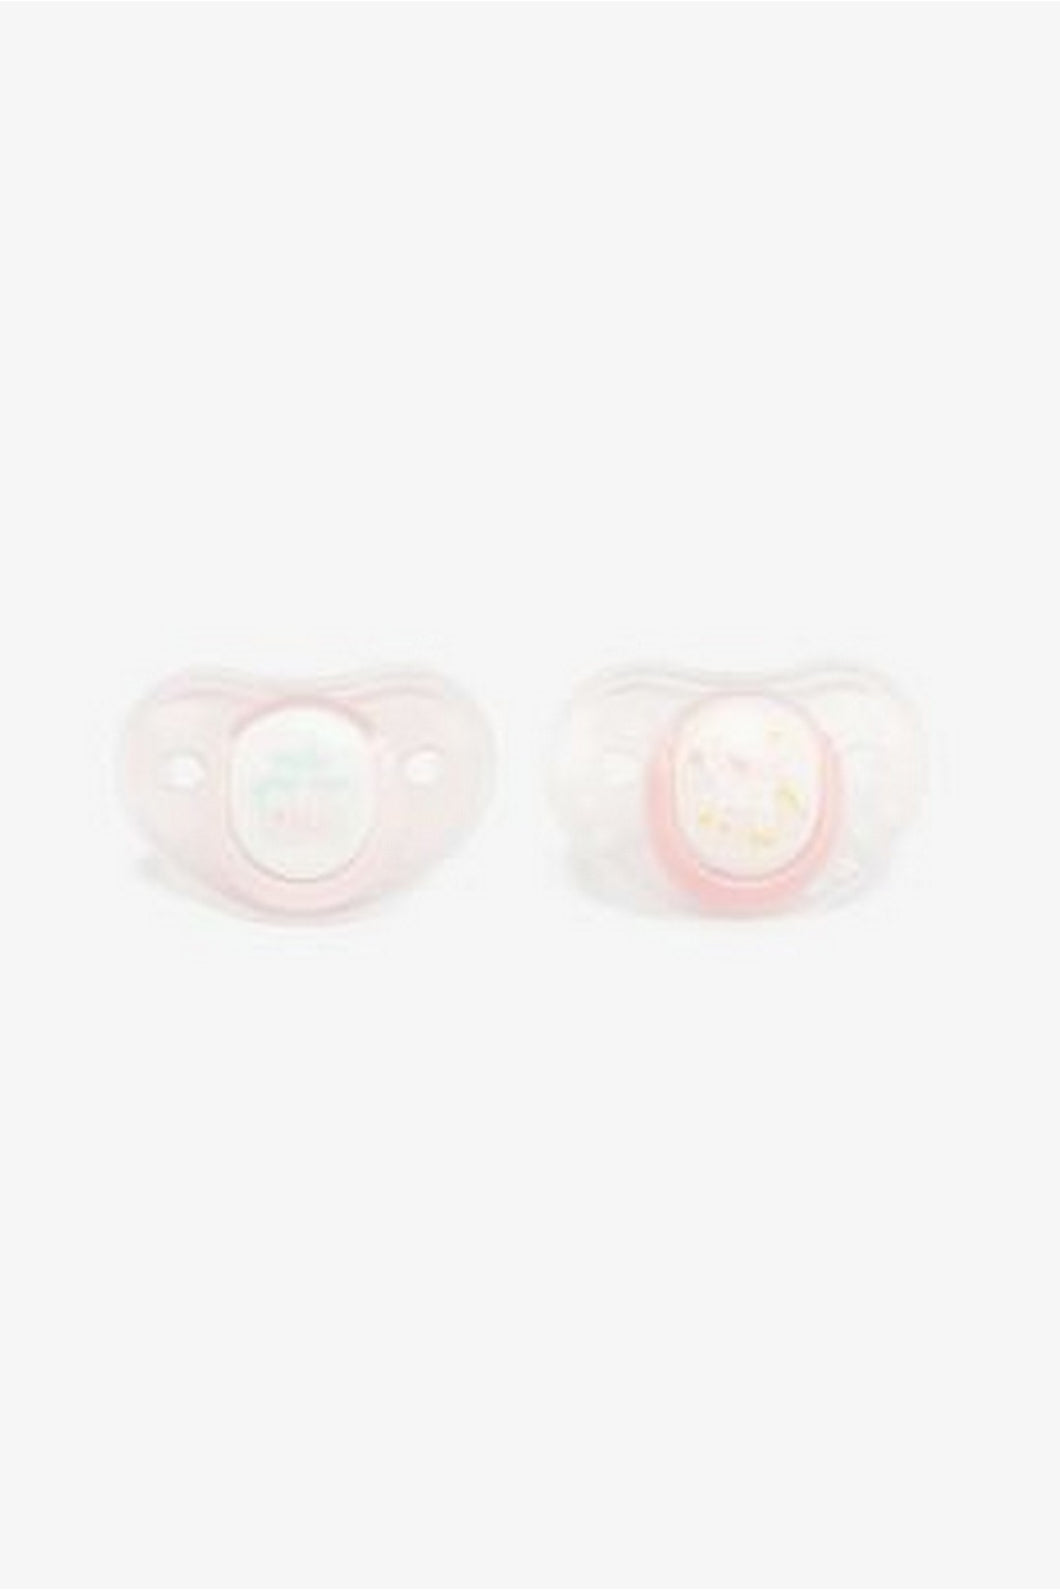 Mothercare Make Your Magic And Unicorn Orthodontic Soothers 6 Months 2 Pack 1